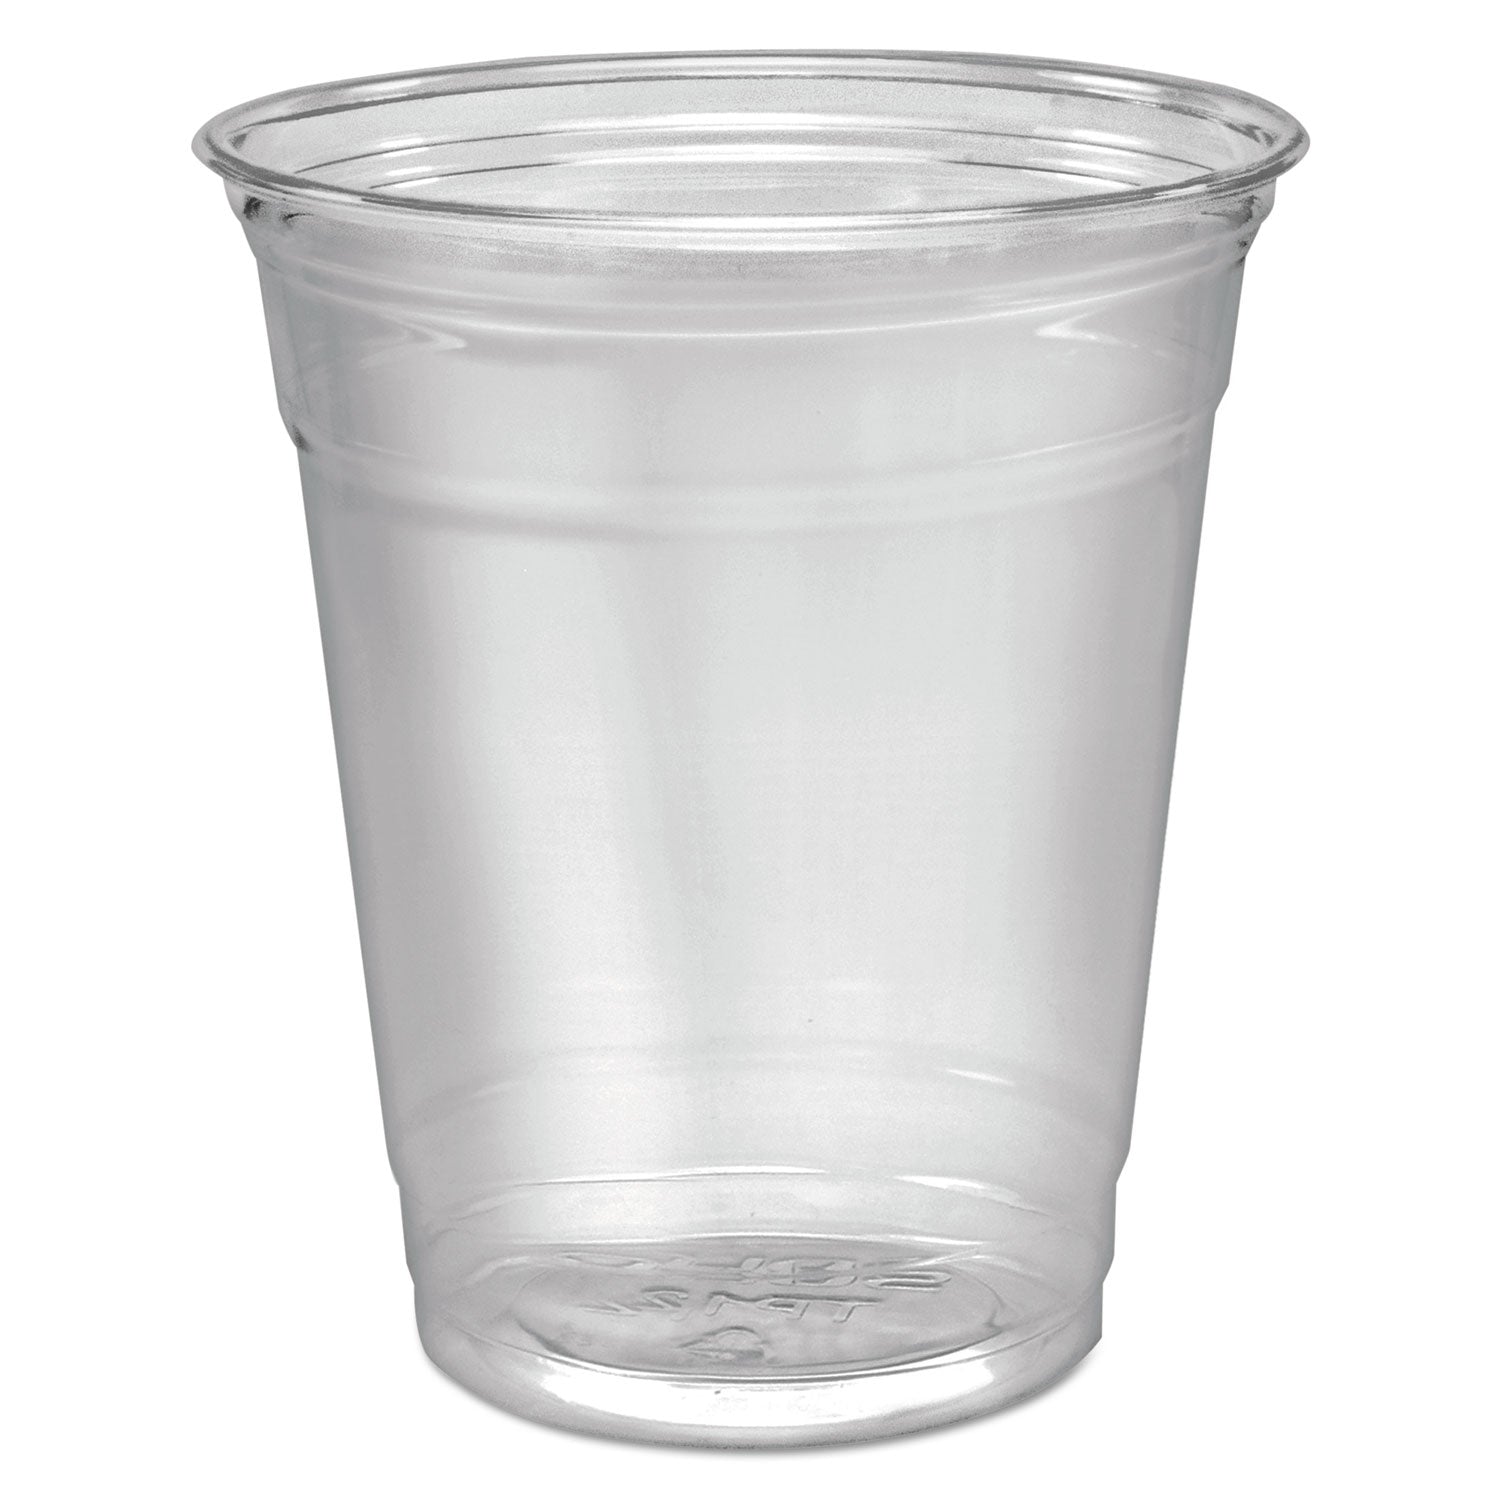 Ultra Clear PET Cups, 12 oz to 14 oz, Practical Fill, 50/Pack - 